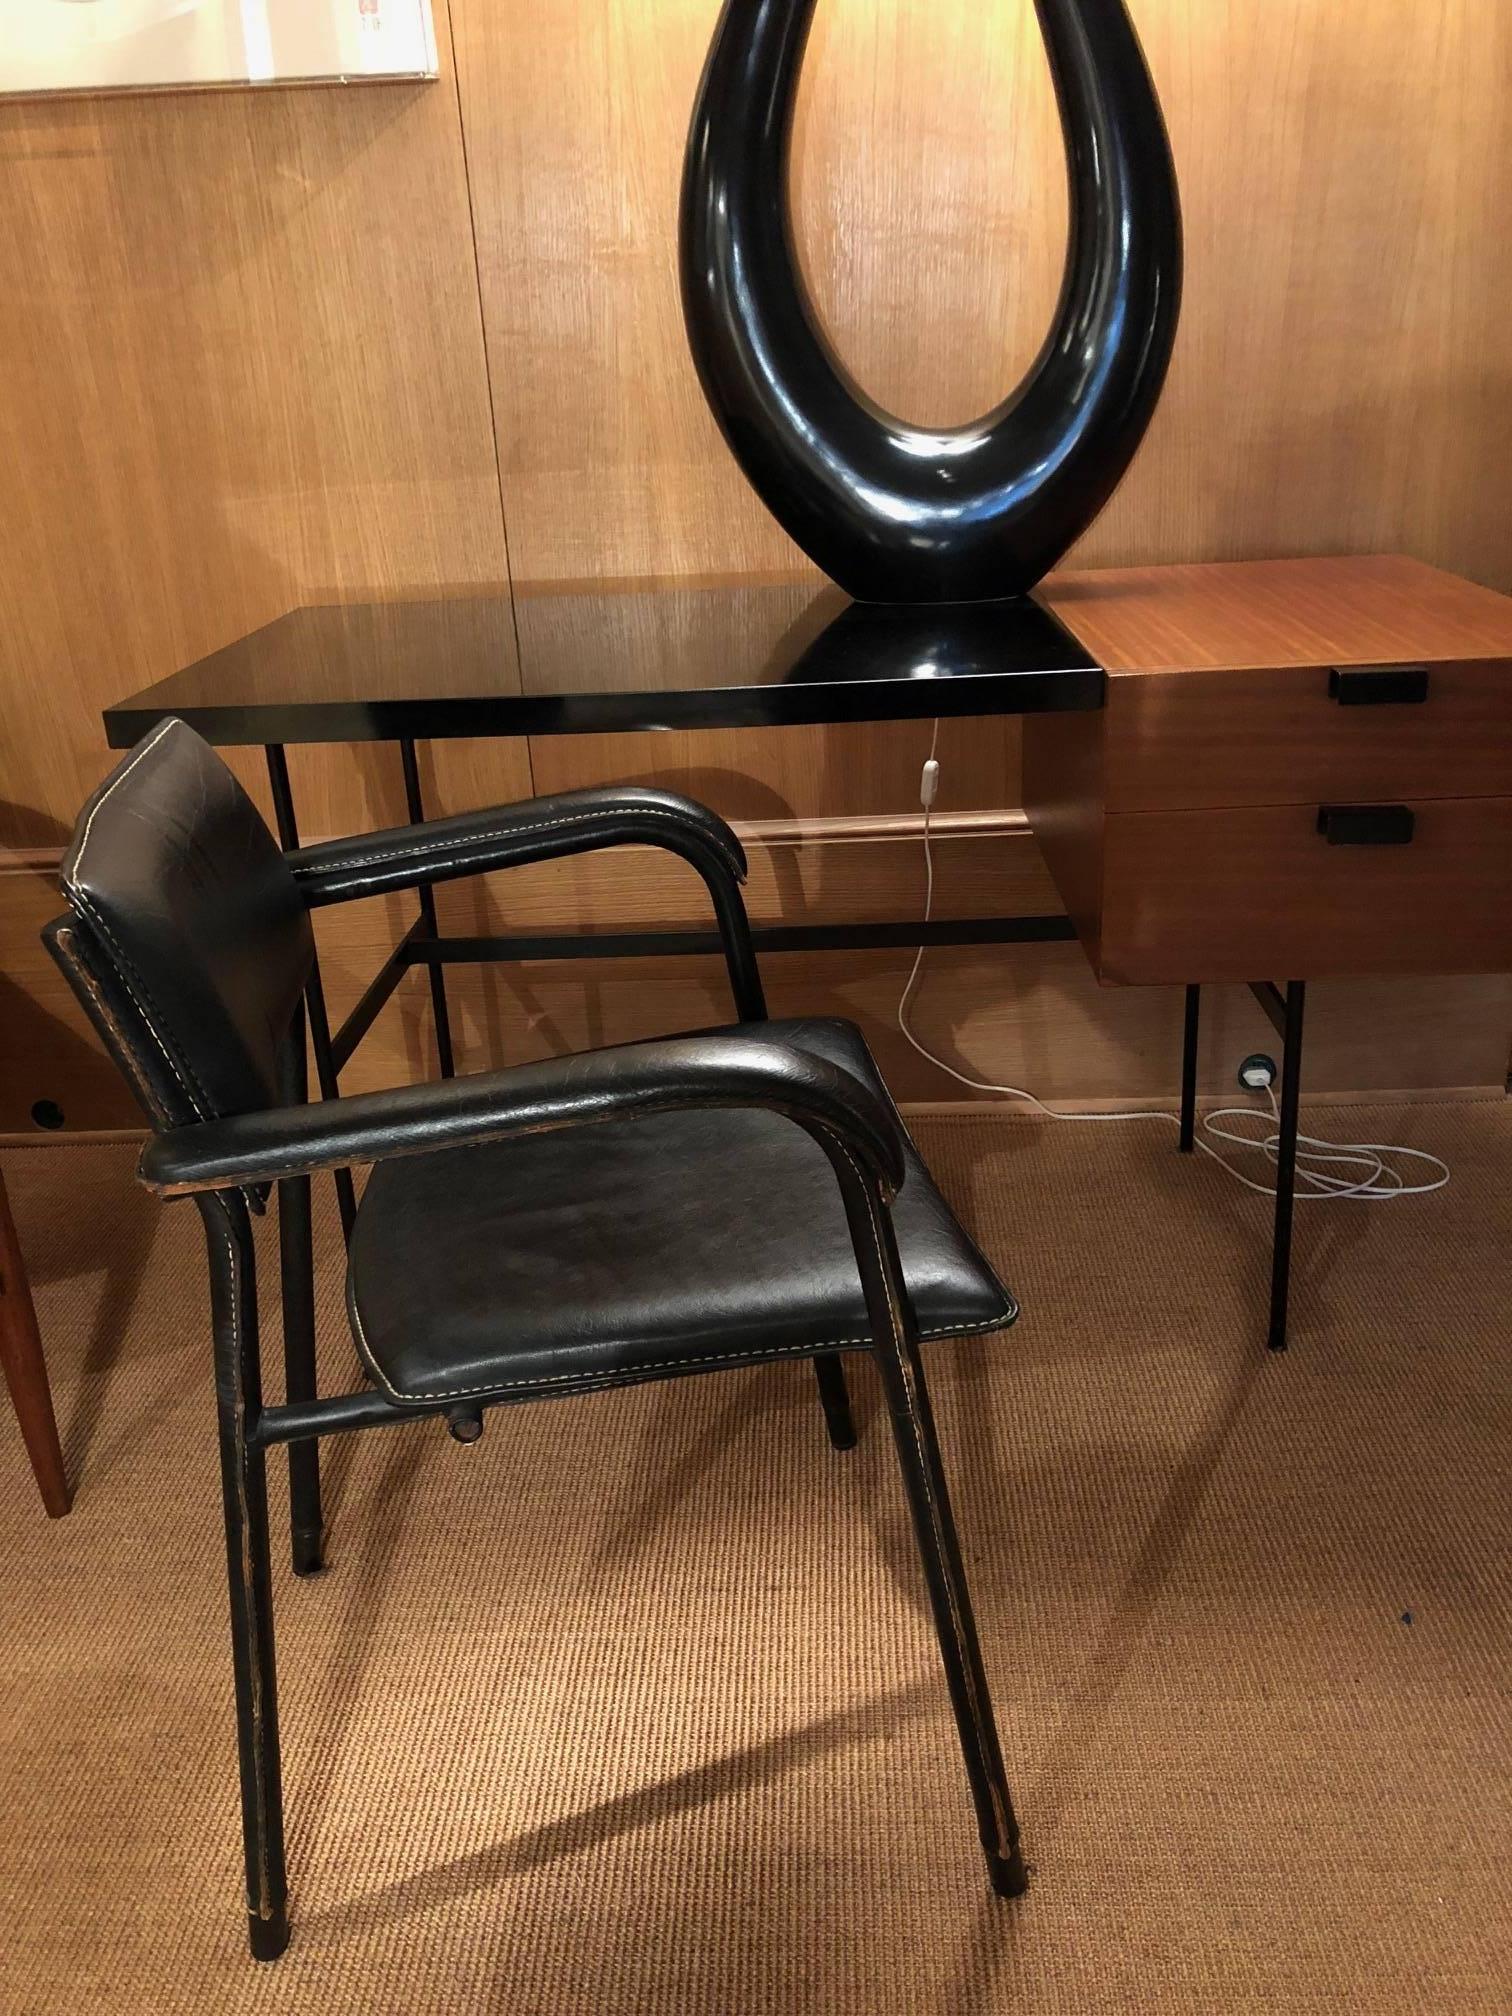 Jacques Adnet desk armchair in its original black leather cover, very rare in this condition which is a precious testimony of the quality of Adnet's work.
Vintage black leather hand-stitched piqué-sellier, tubular metal structure gained with